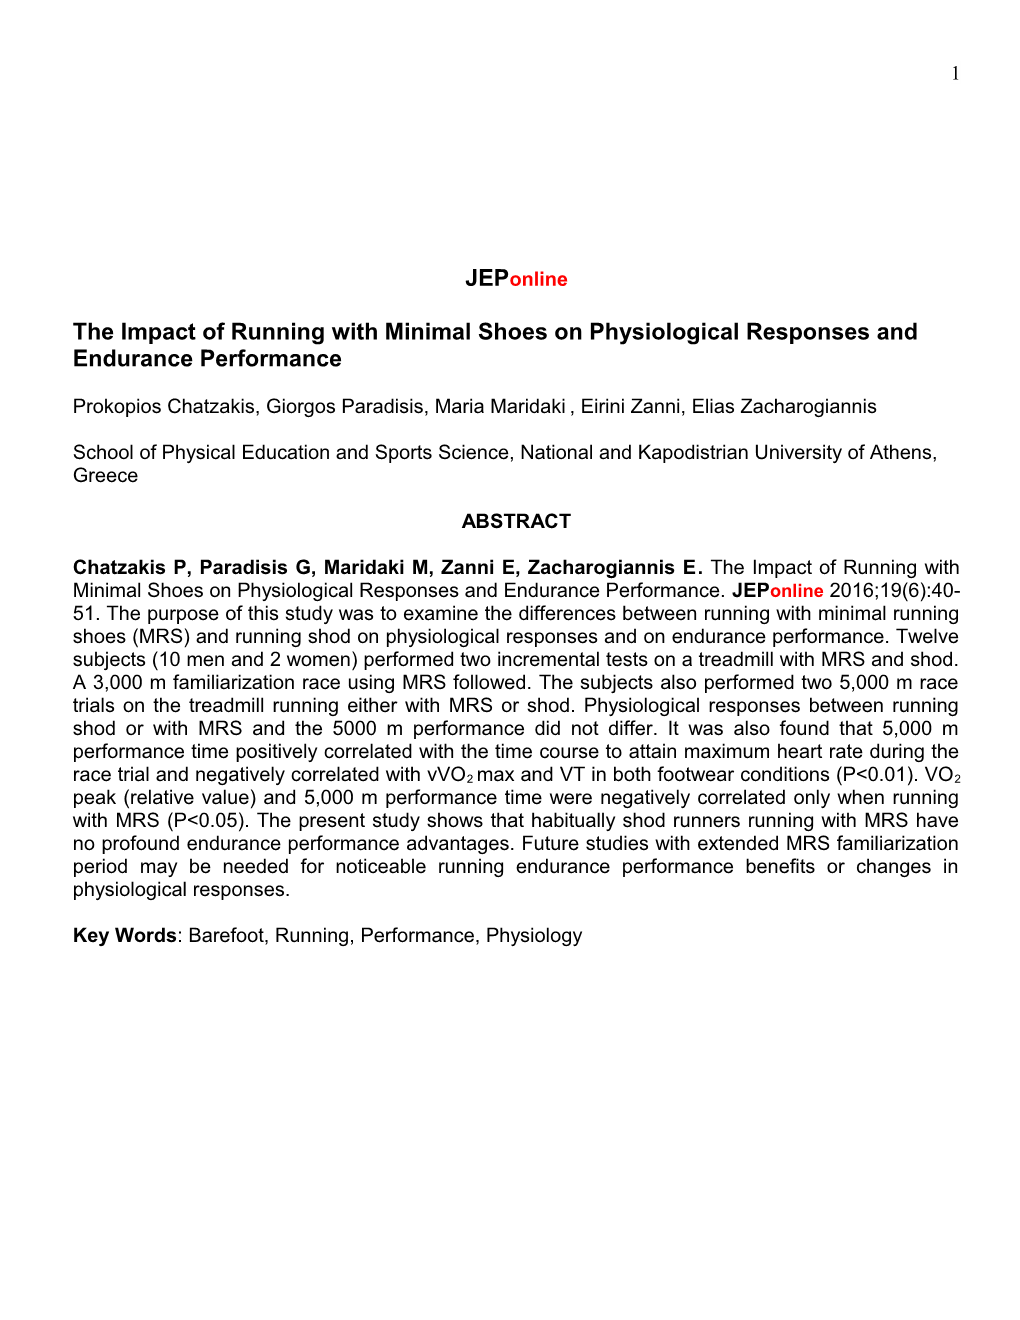 The Impact of Running with Minimal Shoes on Physiological Responses Andendurance Performance